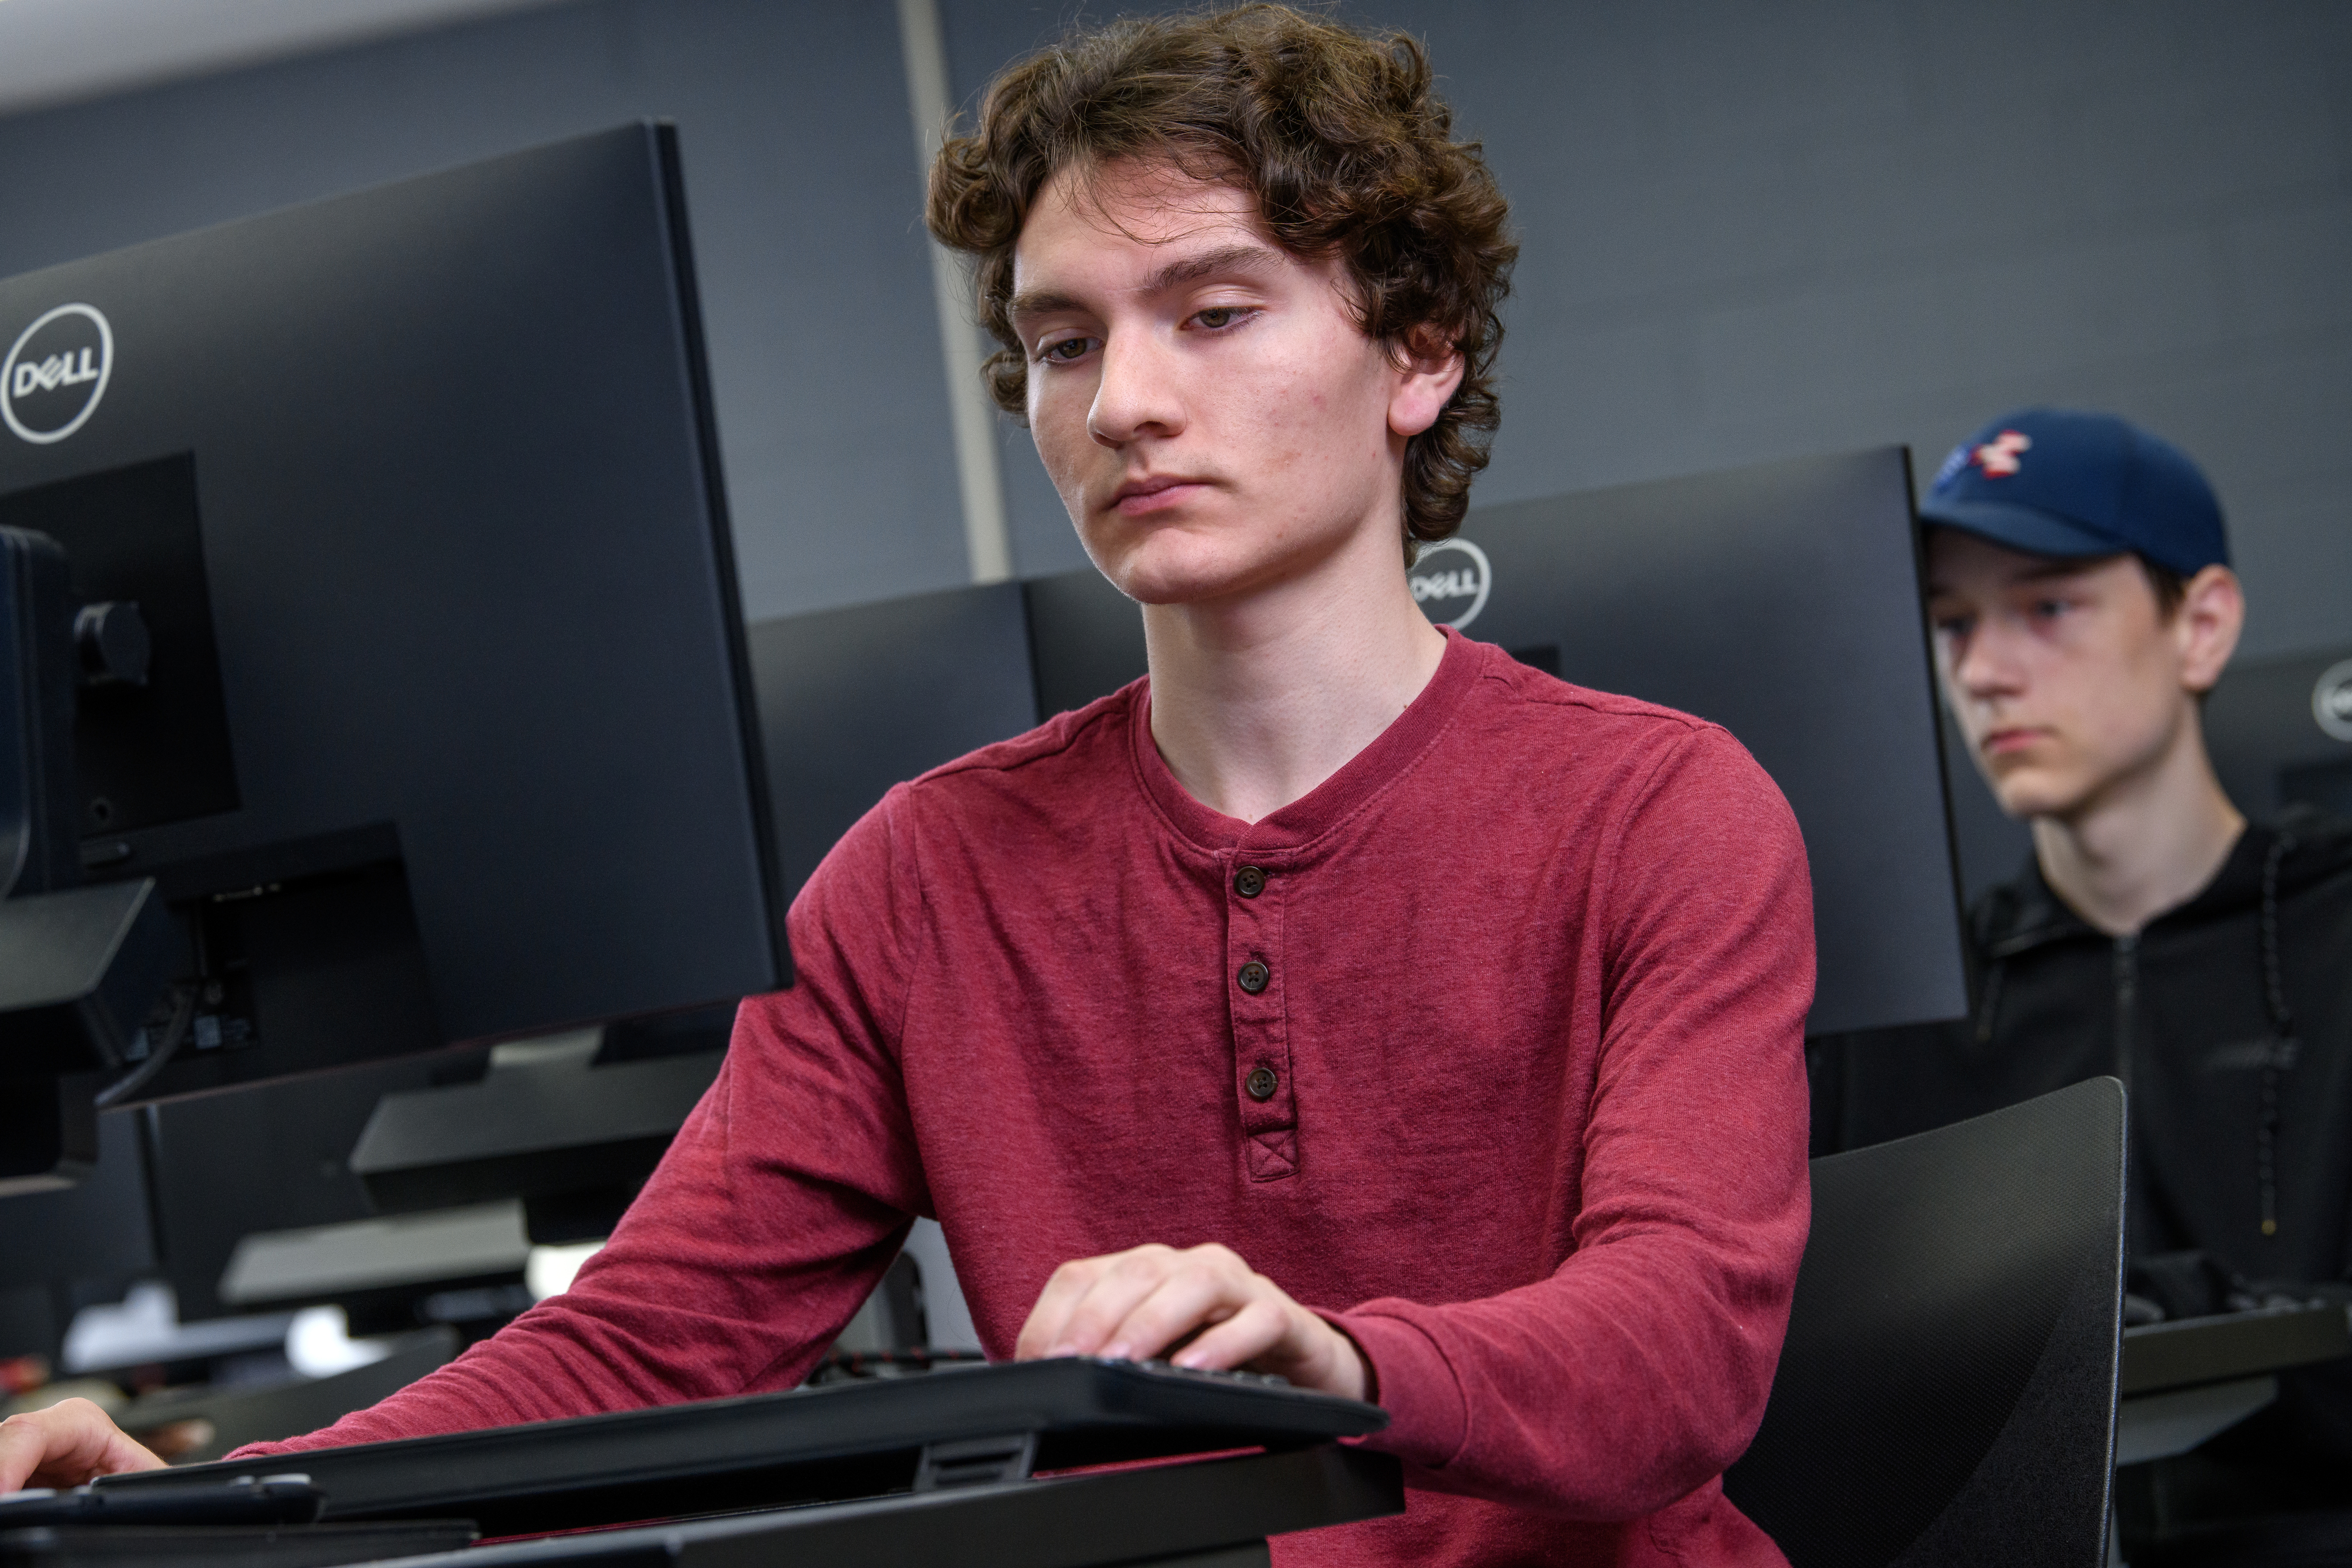 Cybersecurity student working on his computer in the lab.